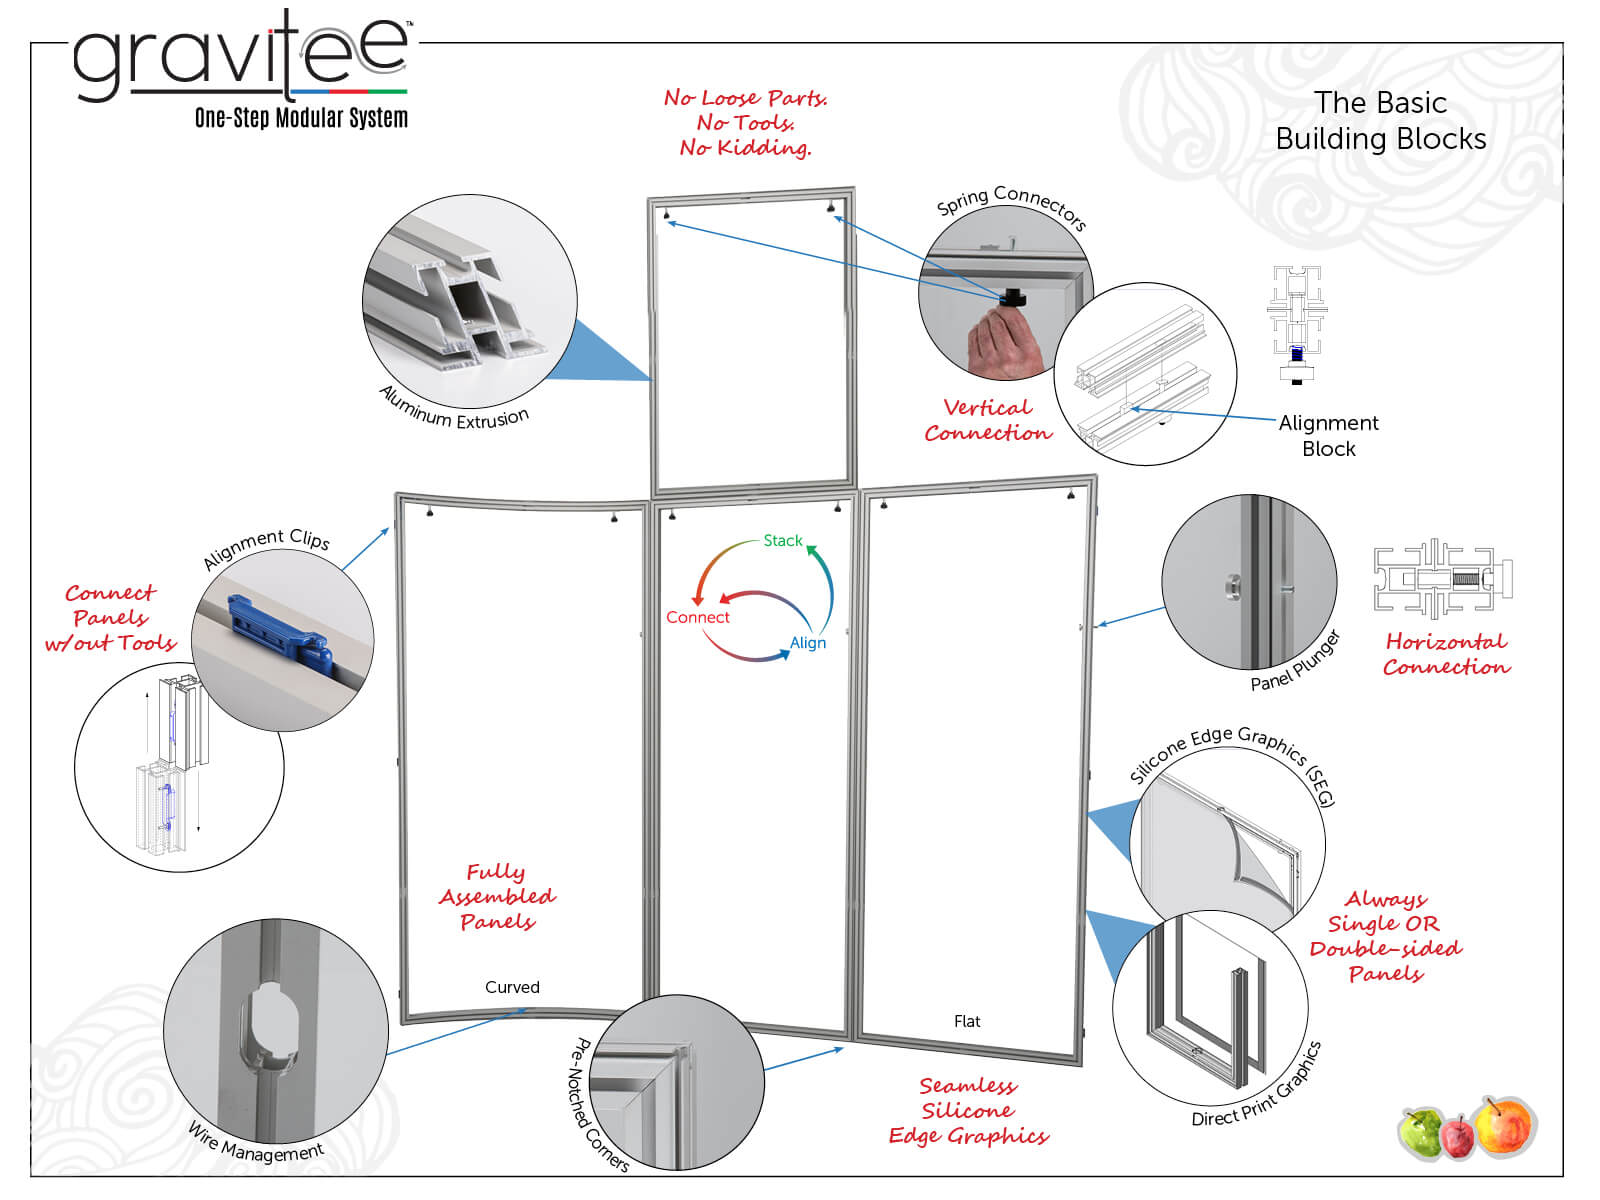 Gravitee One Step Modular System Features